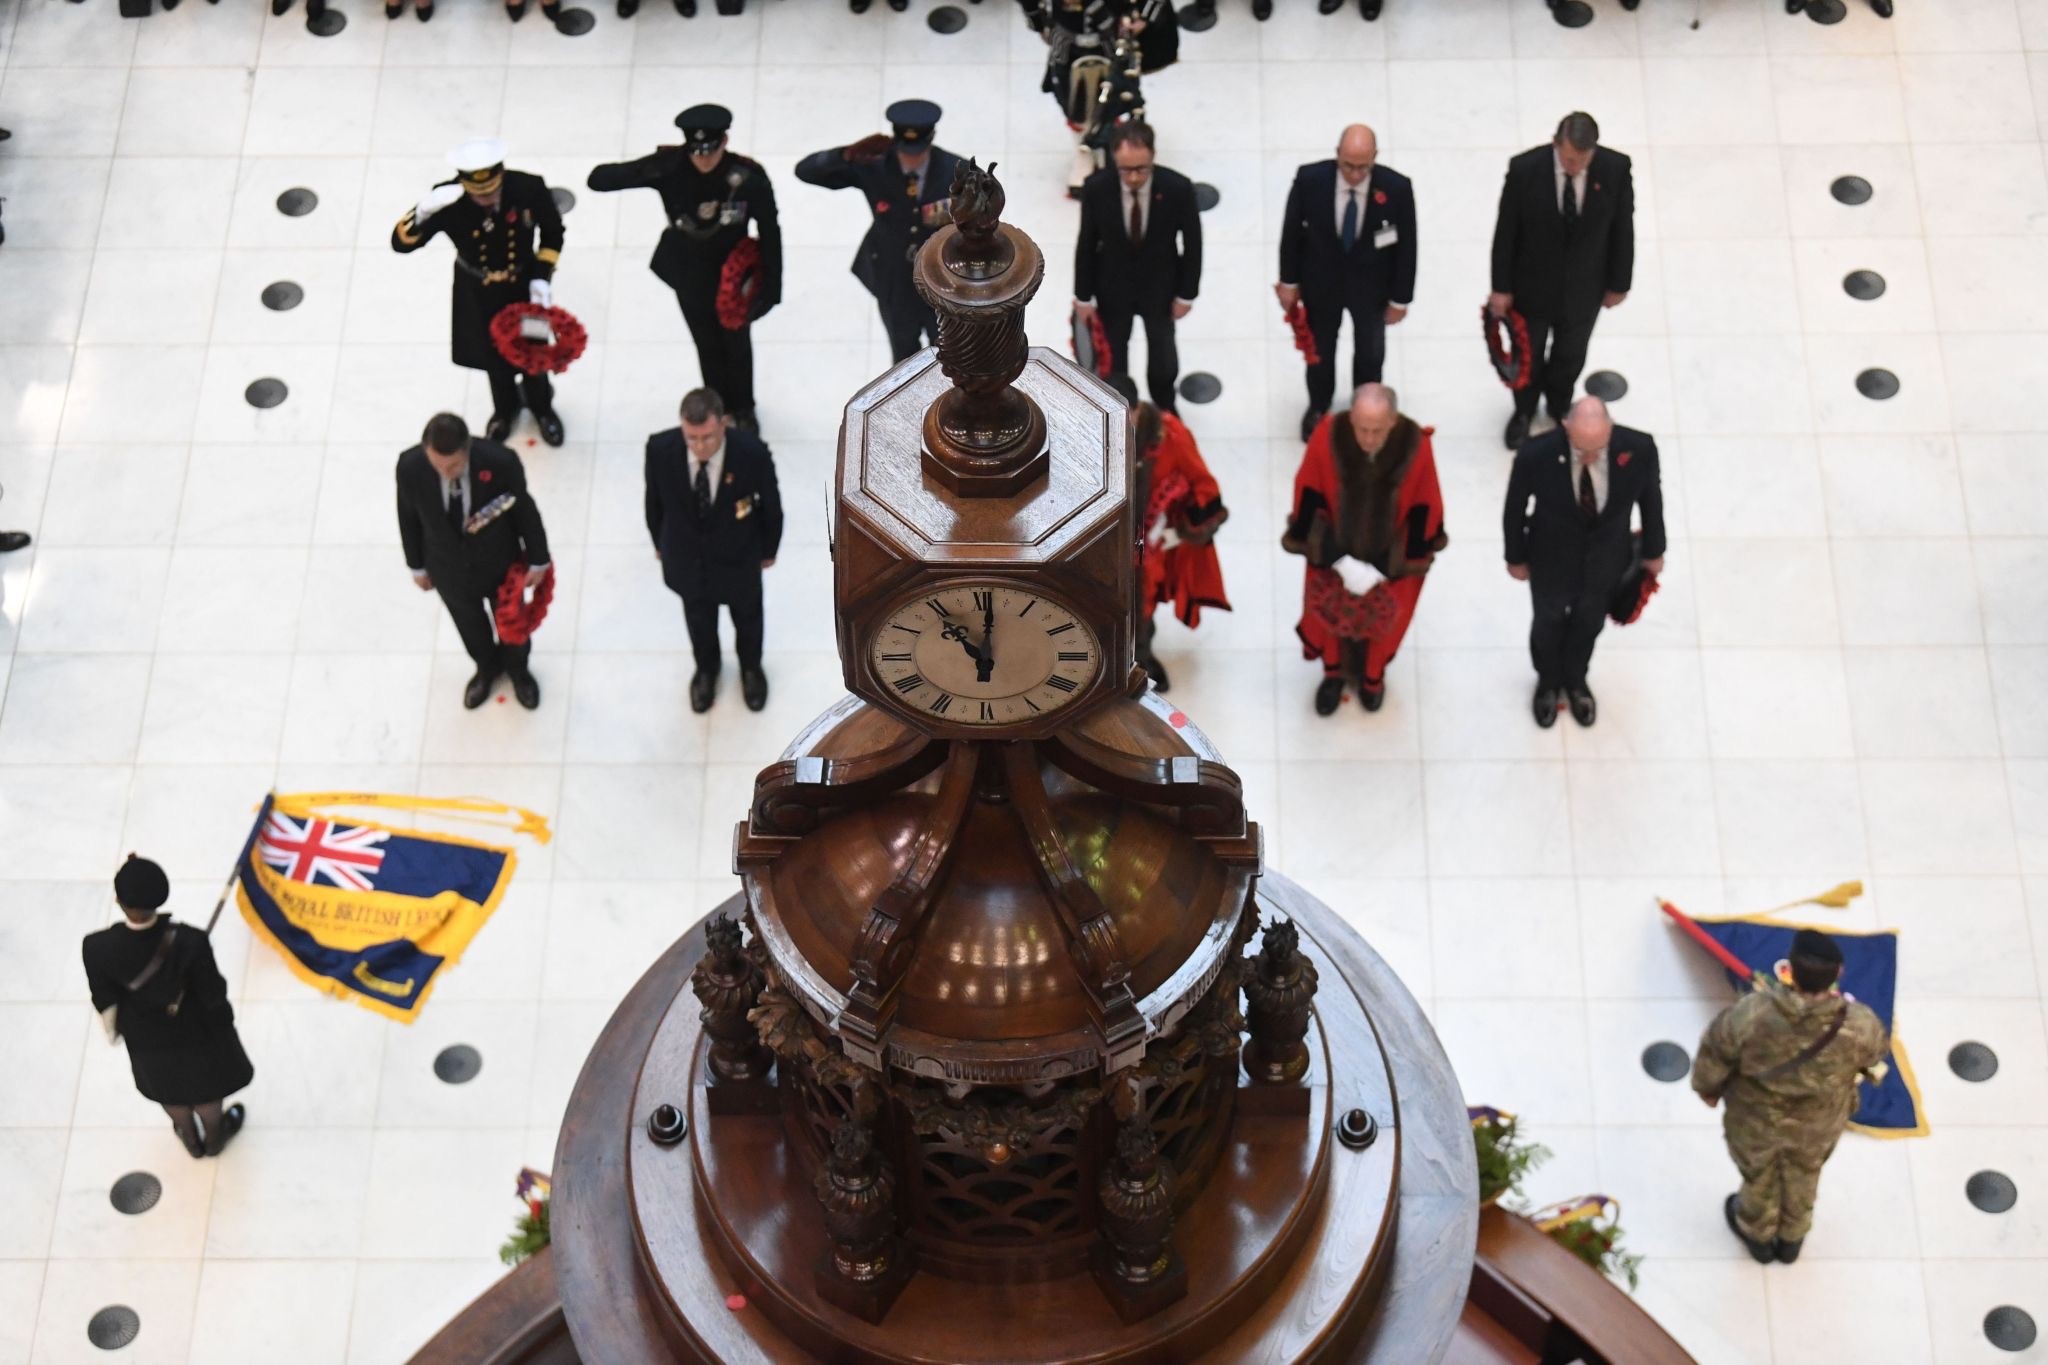 Remembrance Day ceremony in the Lloyd's building